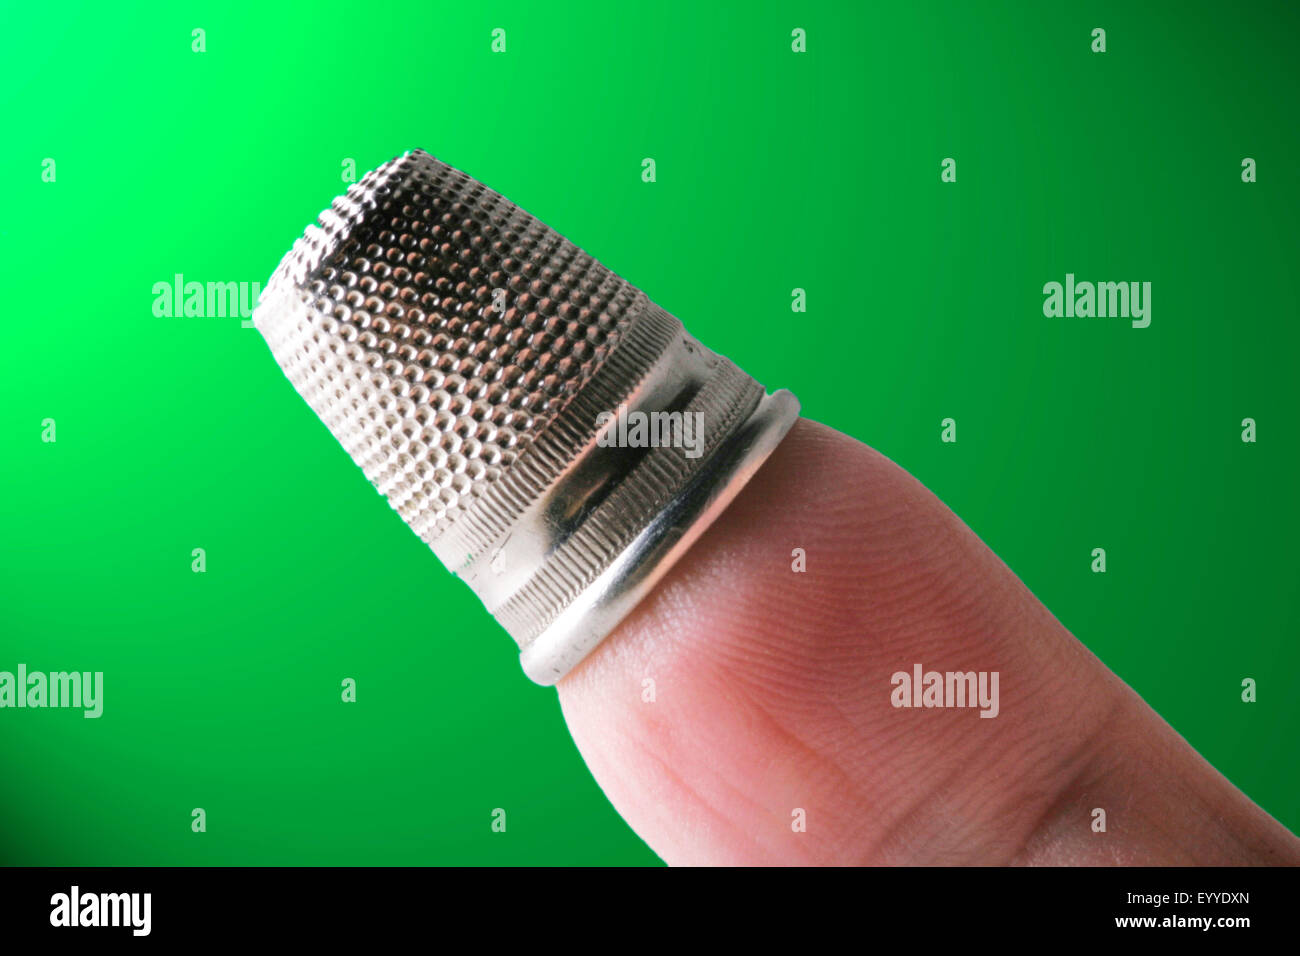 silvery thimble on a finger Stock Photo